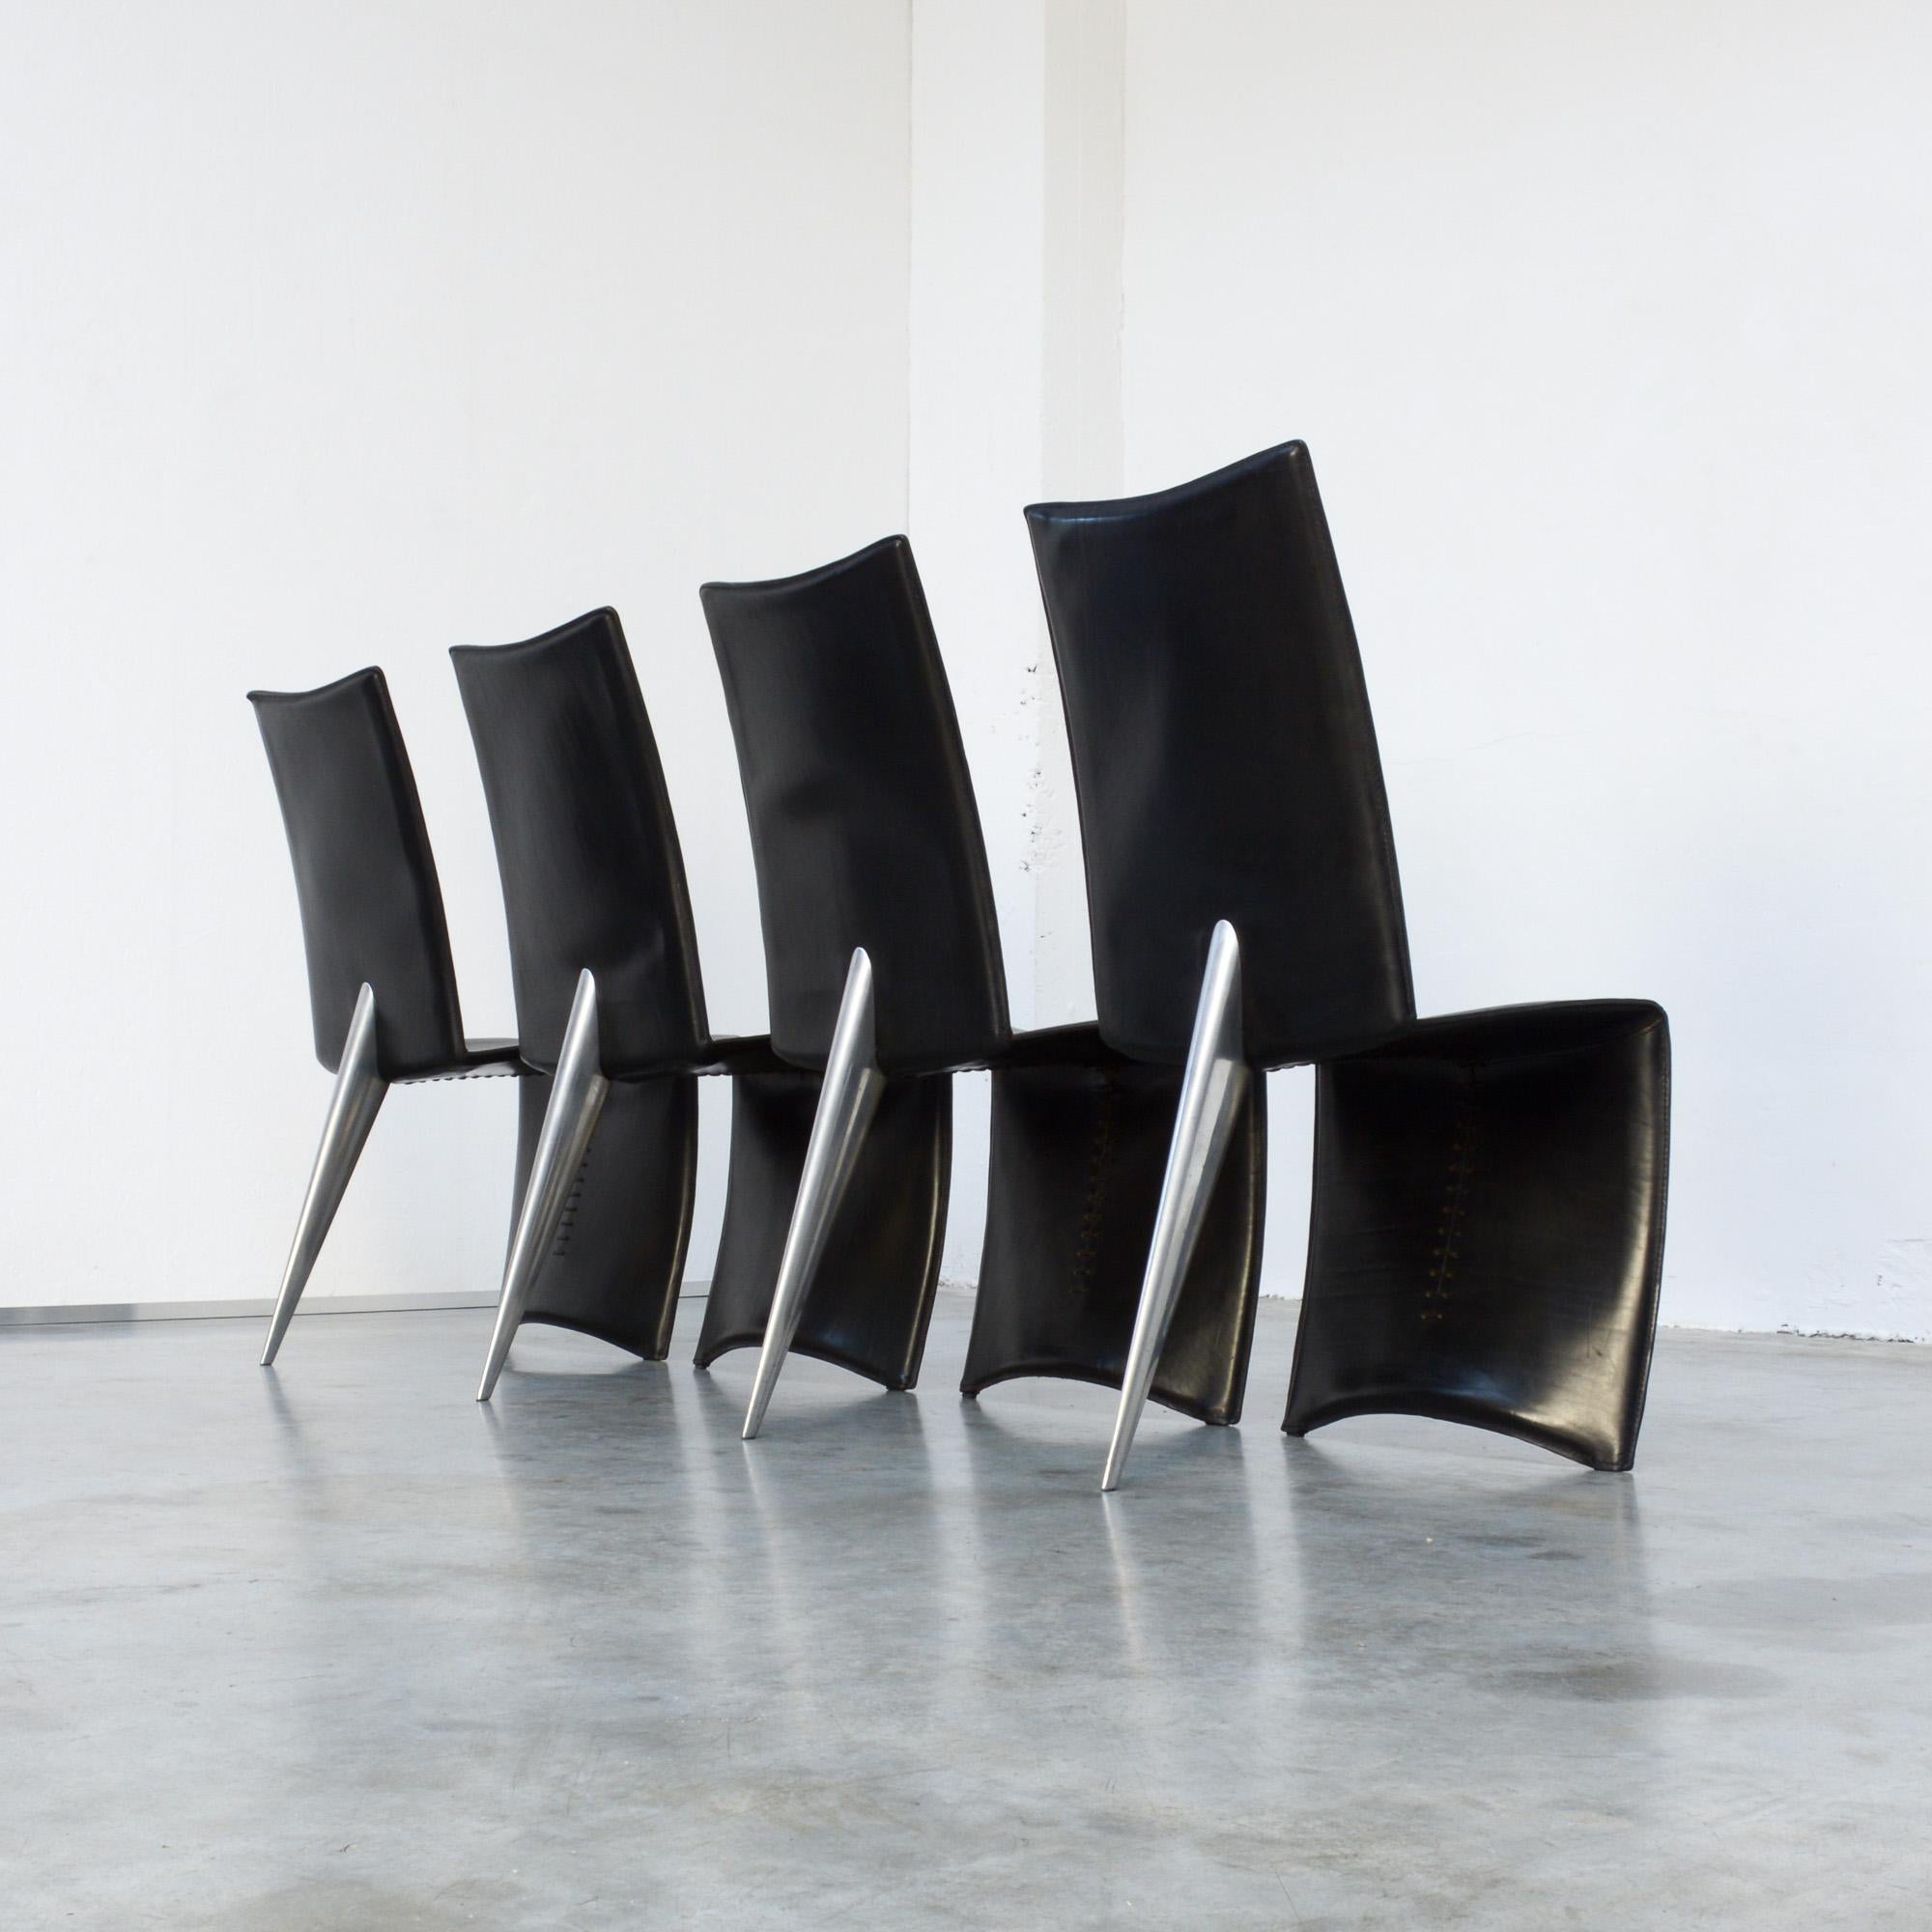 The Ed Archer dining chair was designed by Philippe Starck in 1986 for Driade/ Aleph. The black leather “full dress”, that reaches the floor, strongly opposes to the only polished metal “shark finned” back leg.
It is a strong design executed in